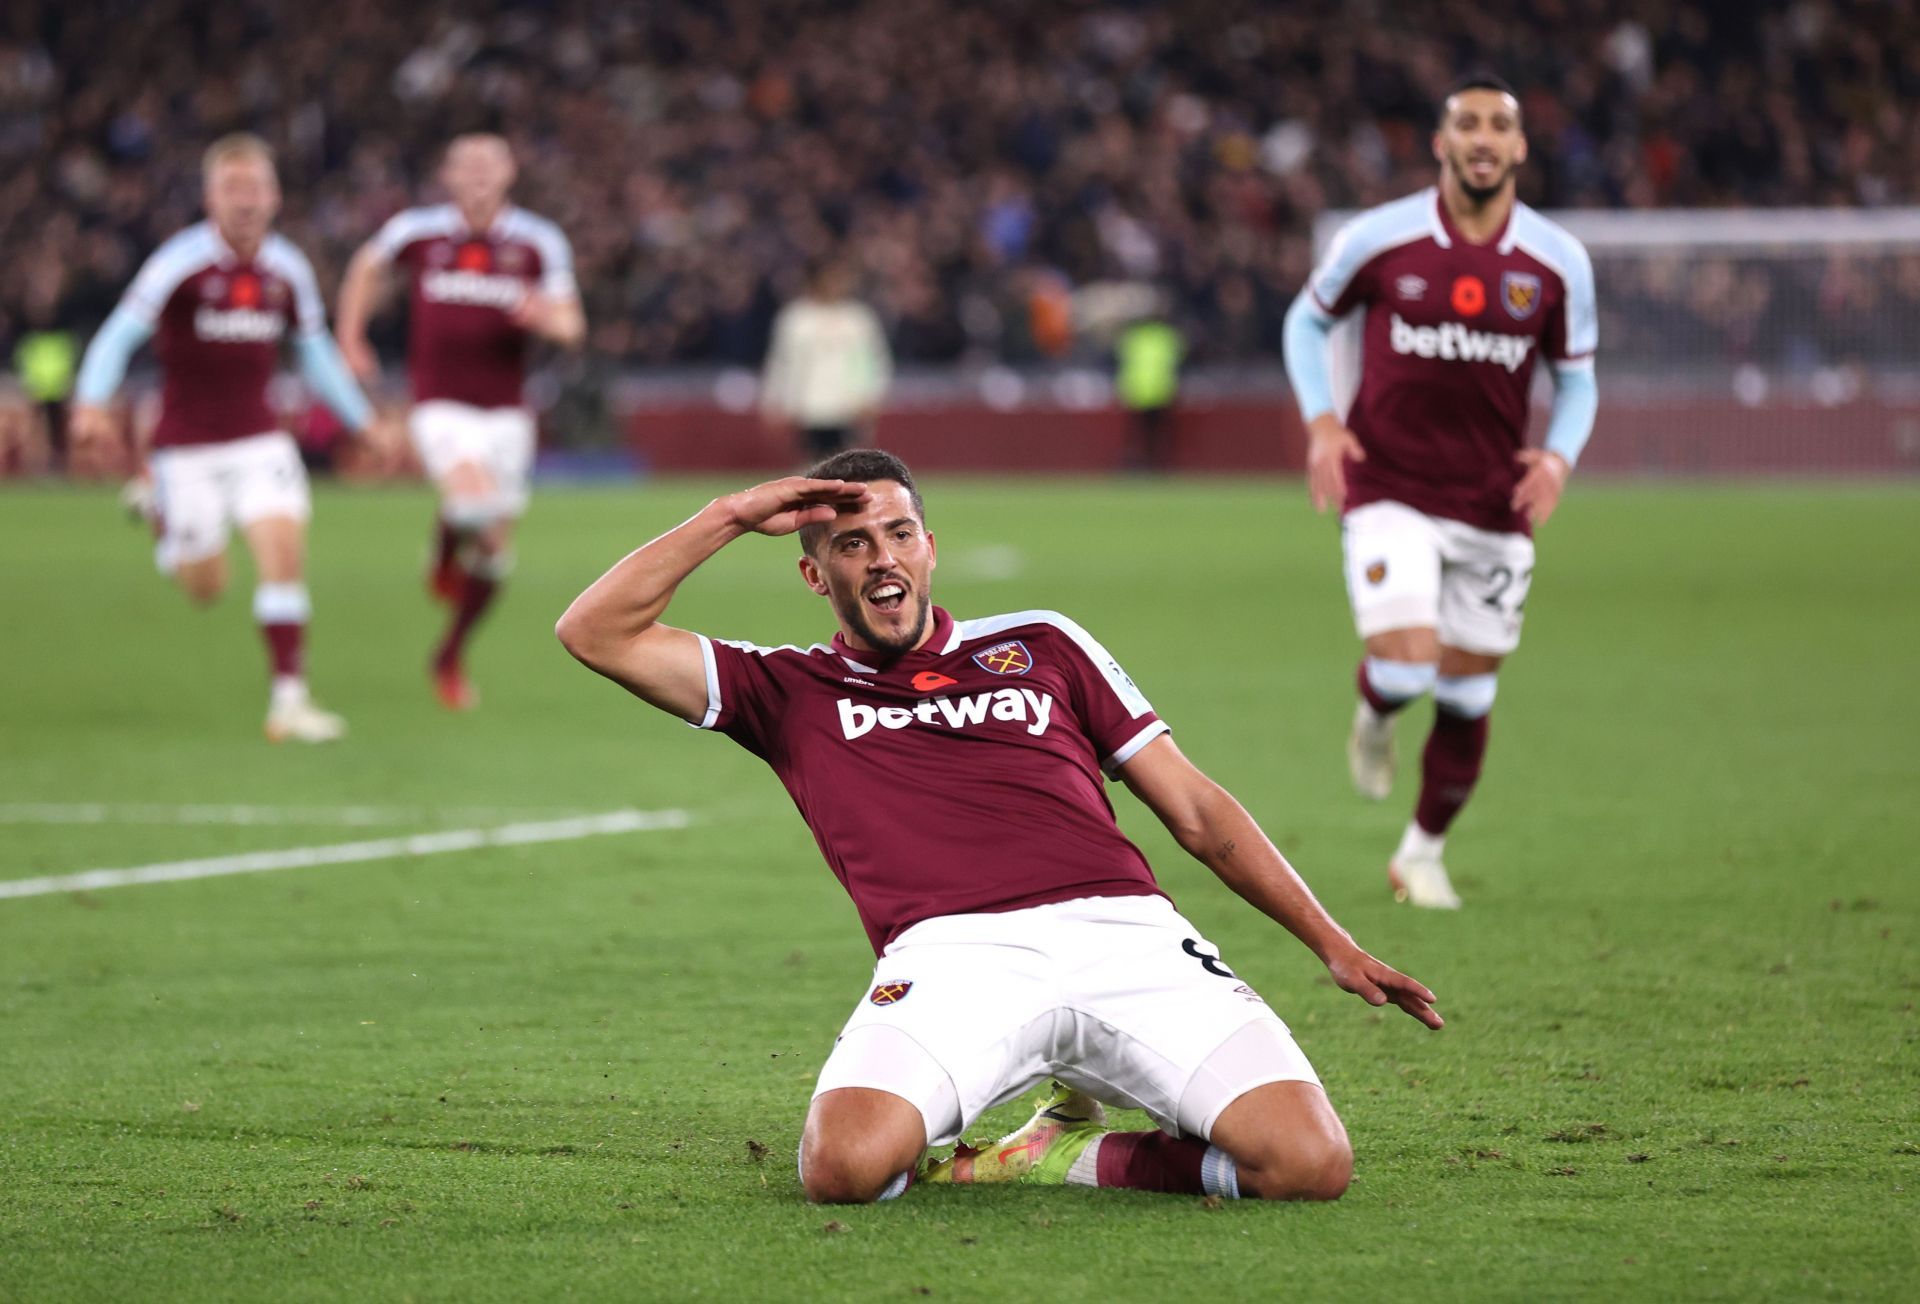 West Ham United have been in fine form this season